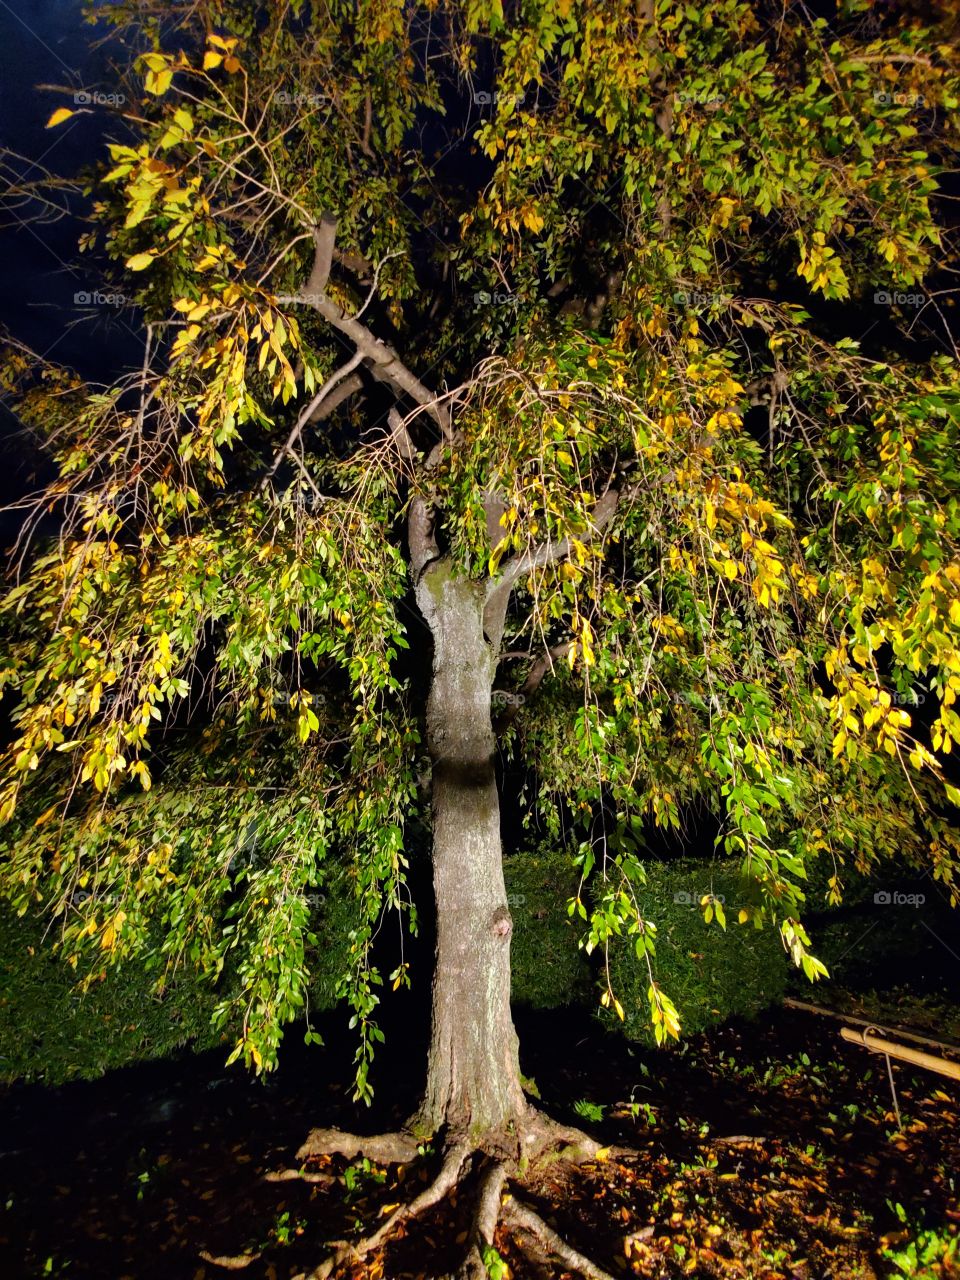 This tree has an amazing glow and would make a great screensaver.